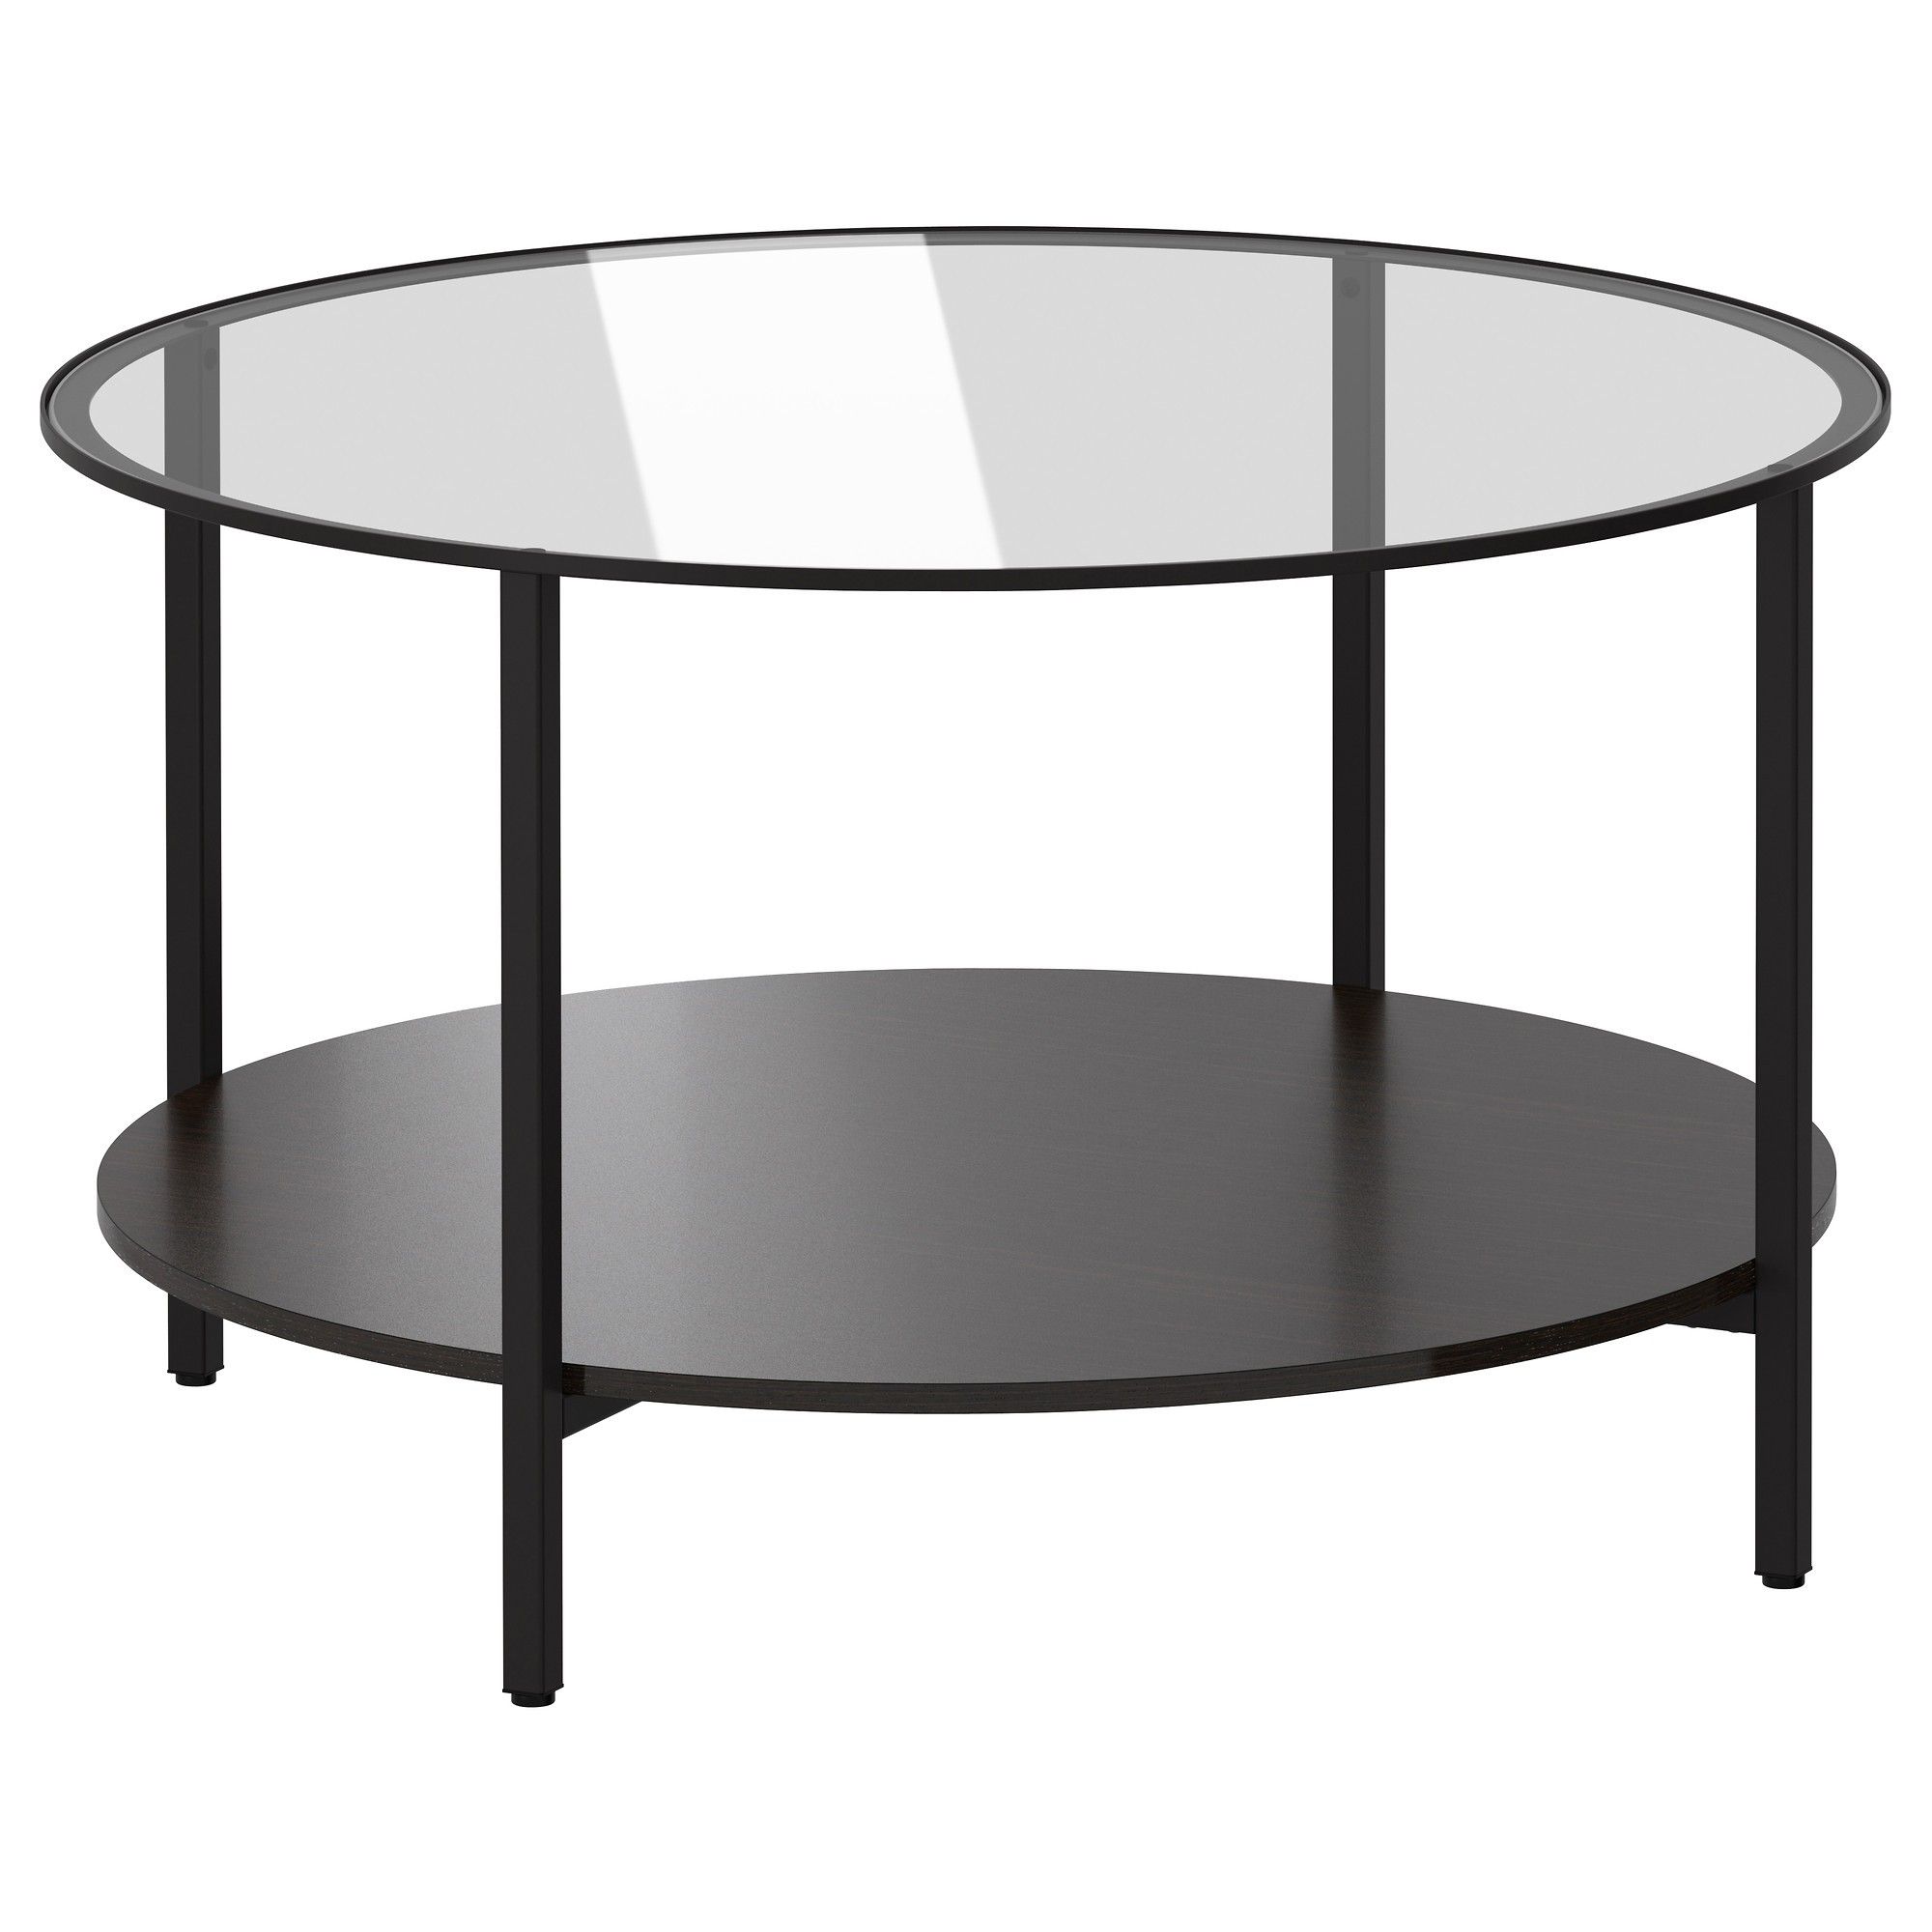 Round Glass Top Coffee Table Wrought Iron Rod Furniture Living Room Rounded Glass Top Coffee Table With Black Wrought Iron Frame Round Coffee Table With Metal Le (View 7 of 10)